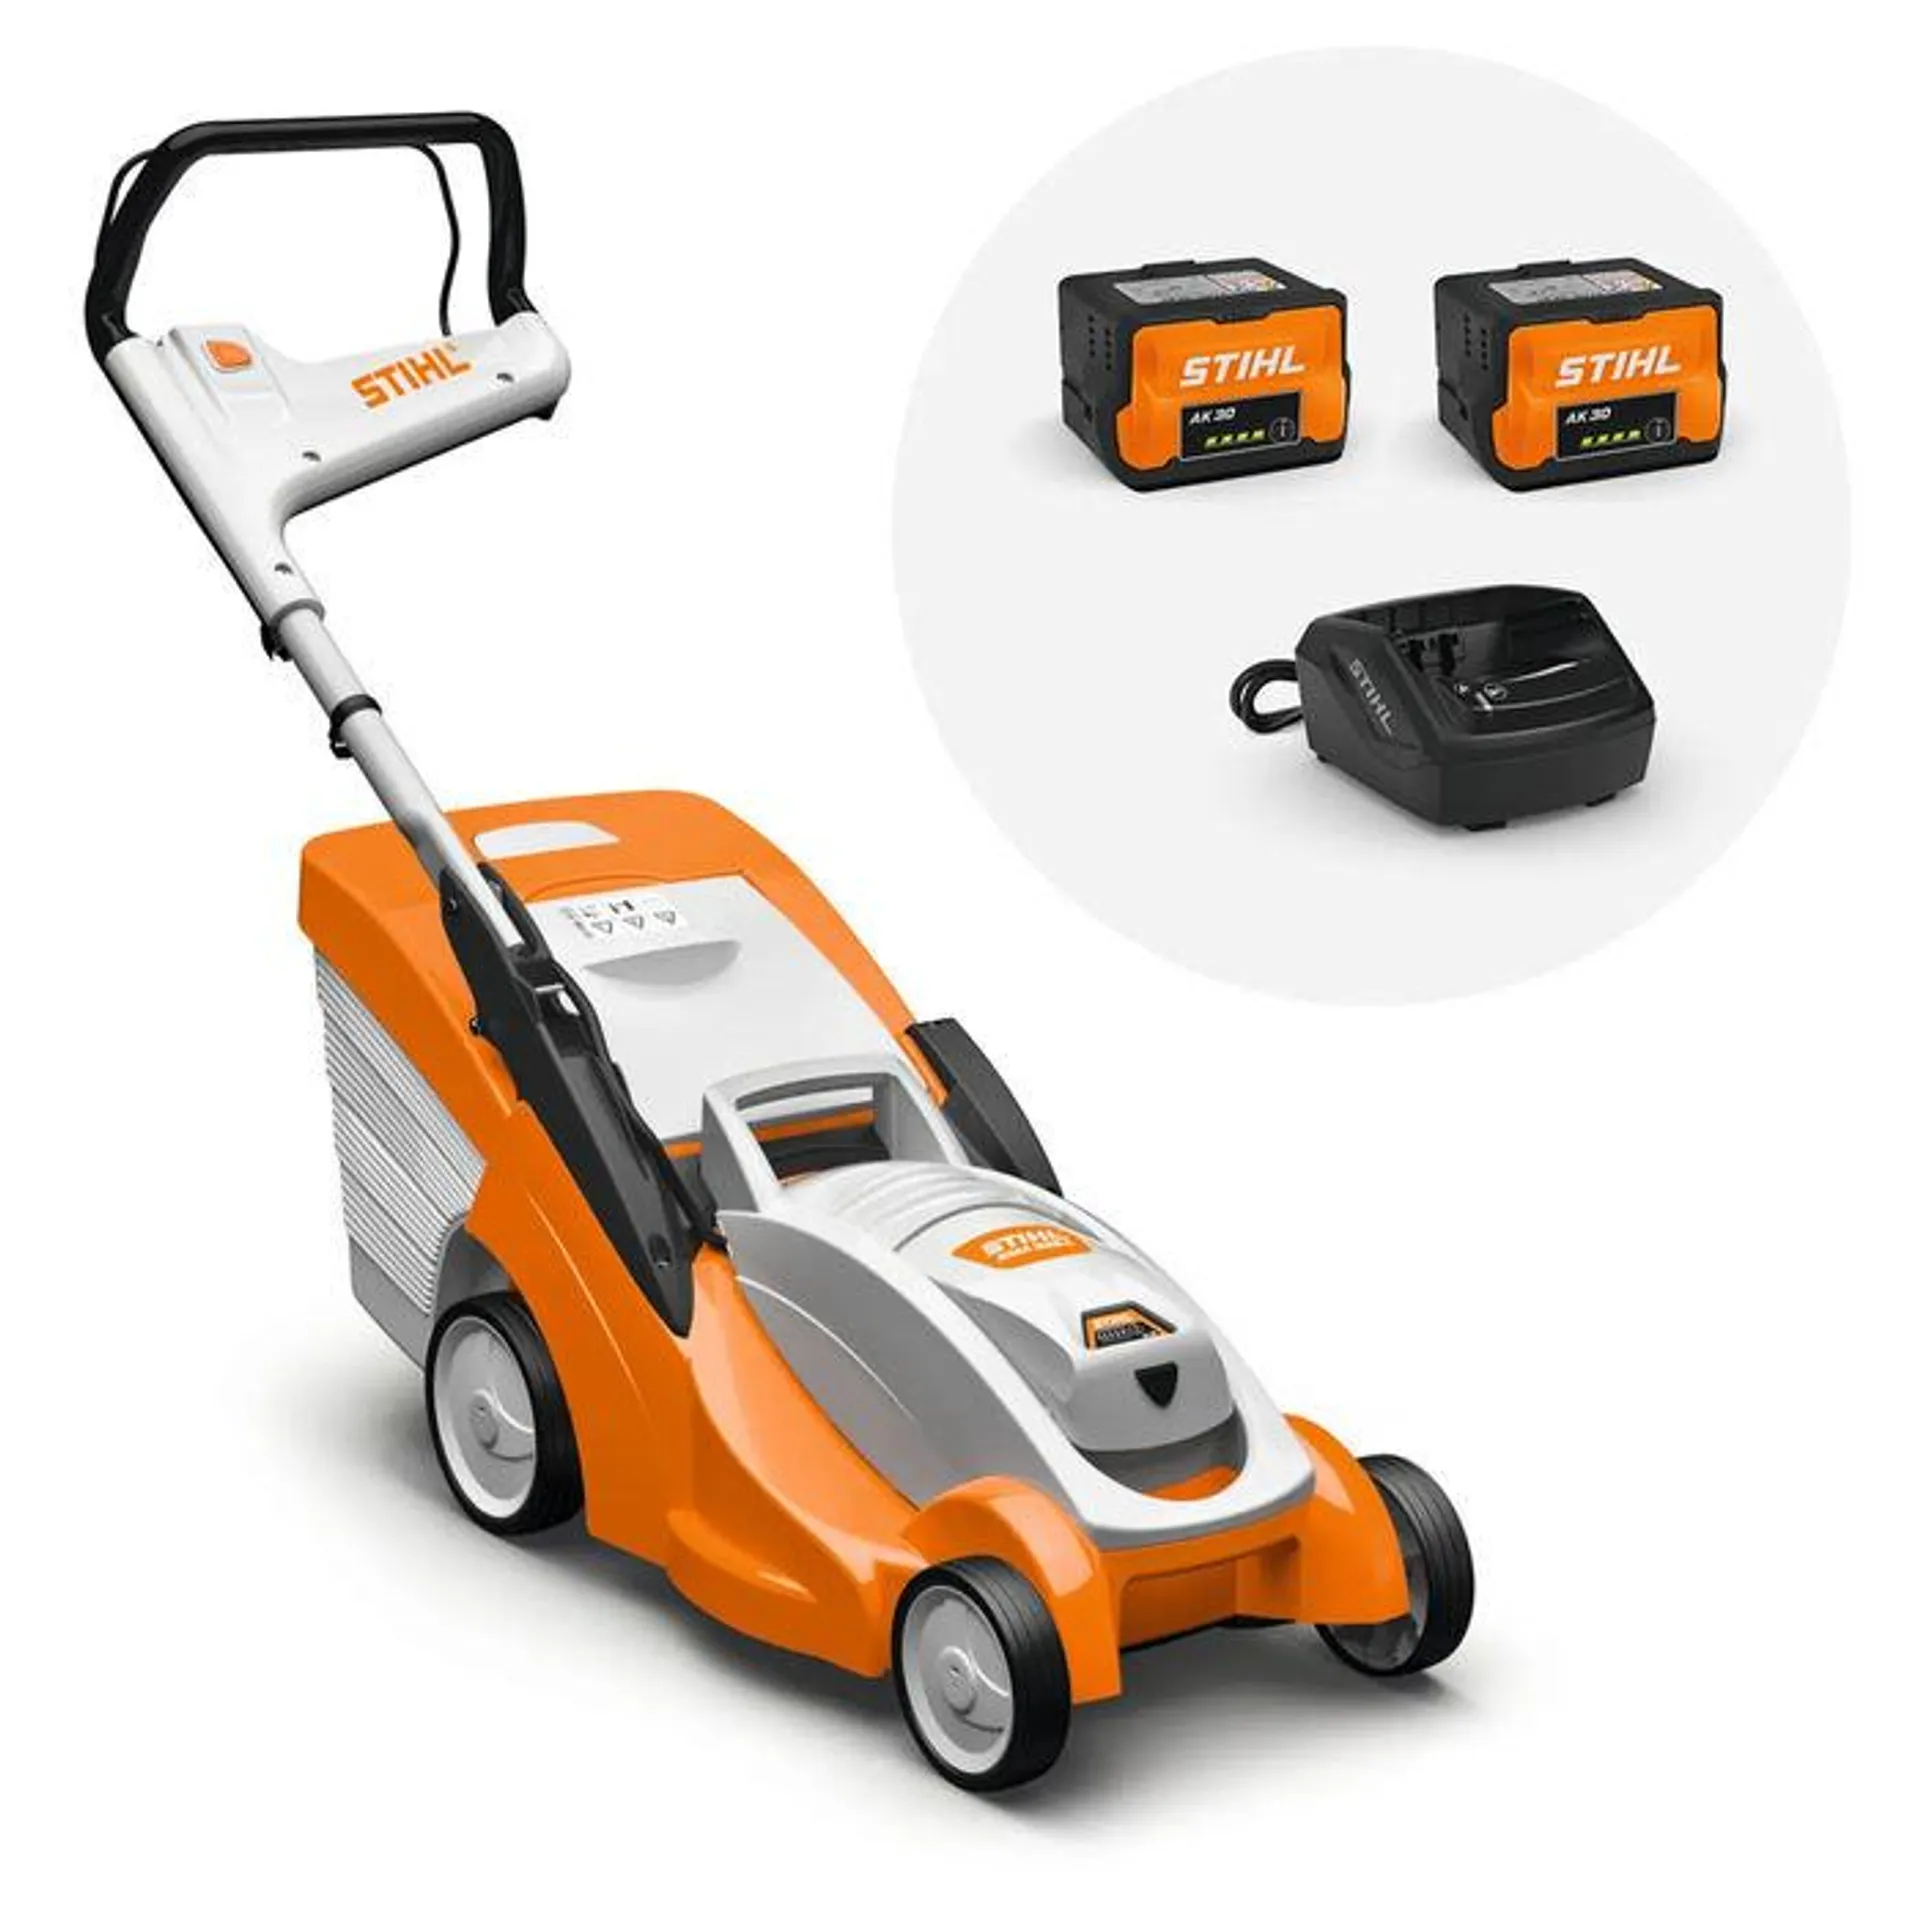 STIHL RMA 339 C Battery Lawnmower Kit with free second battery